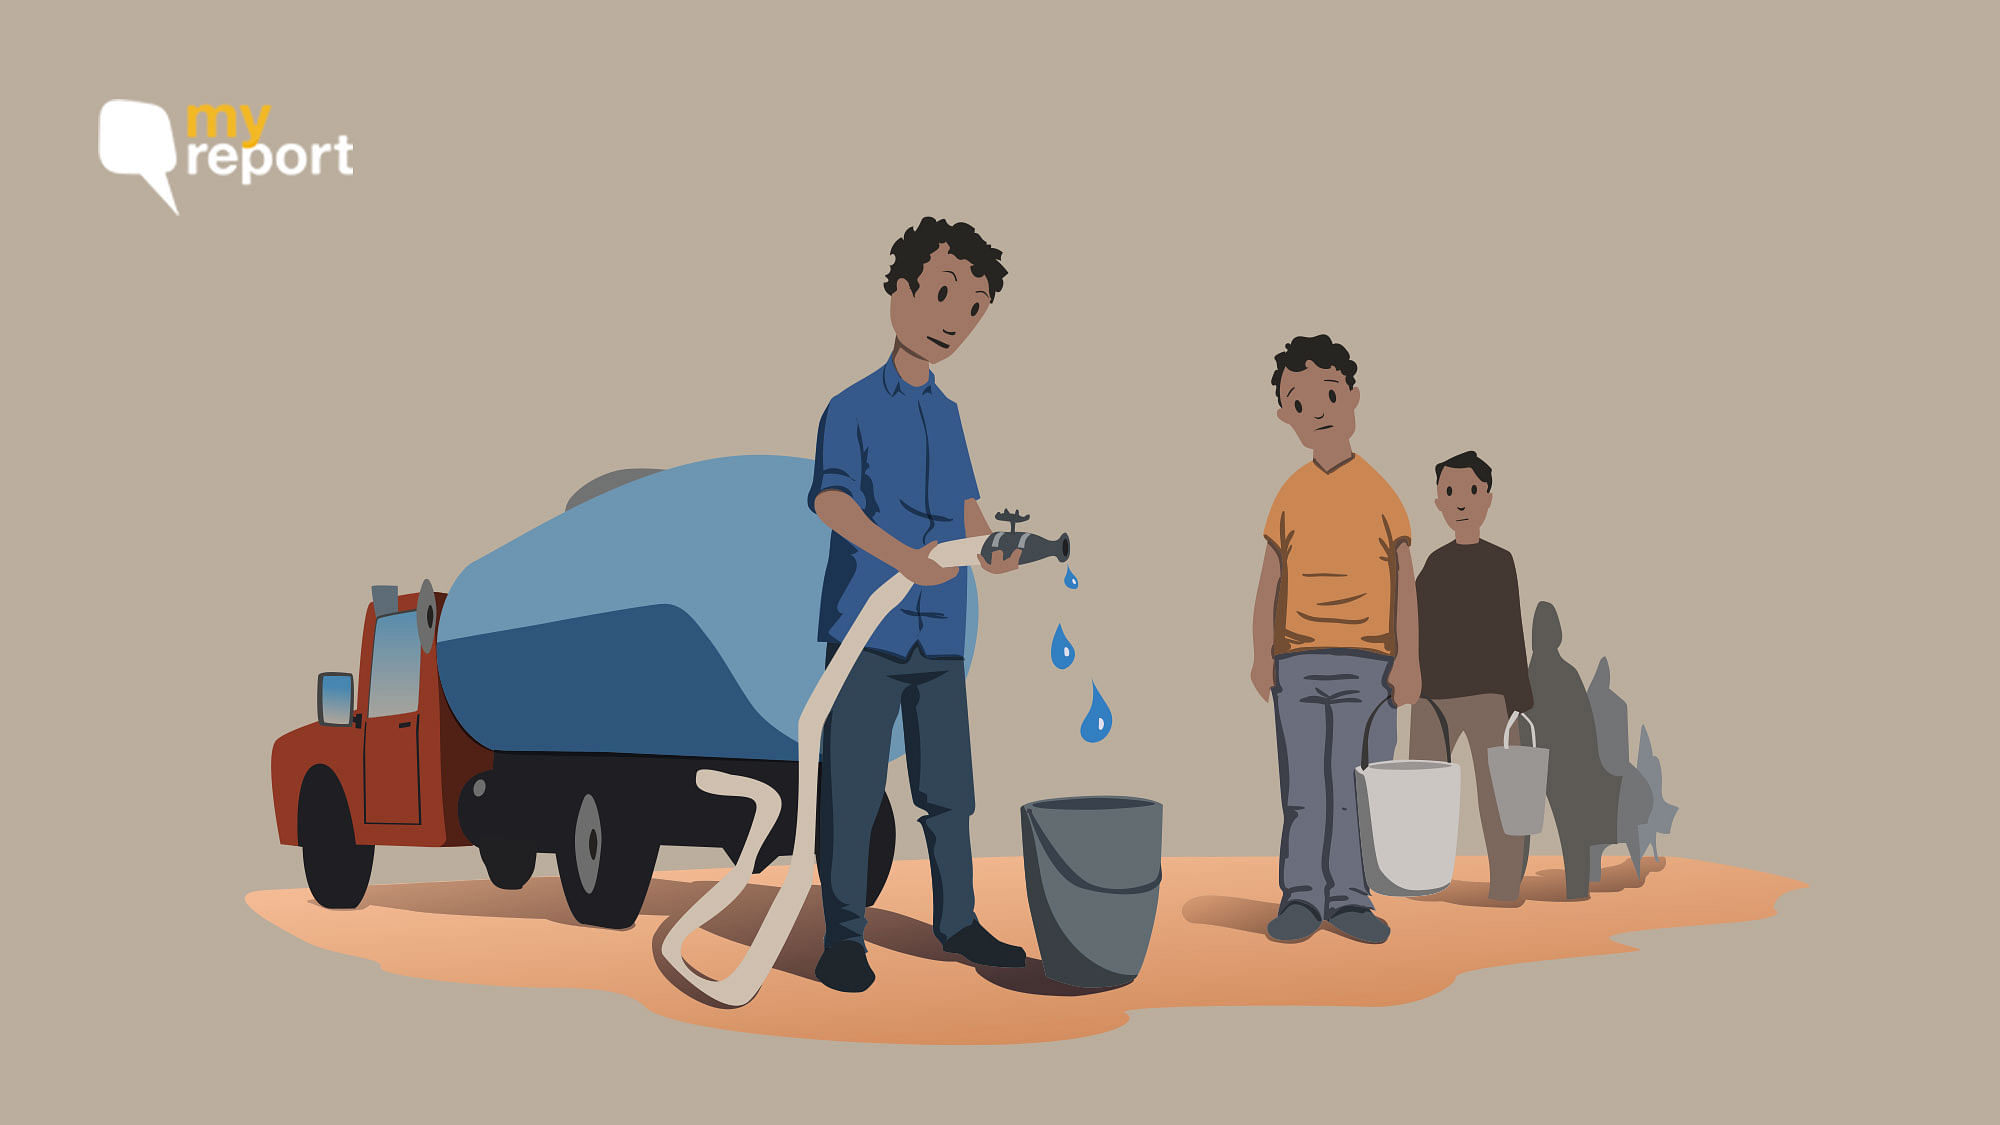 Here are ten facts that show the water crisis in India is serious.